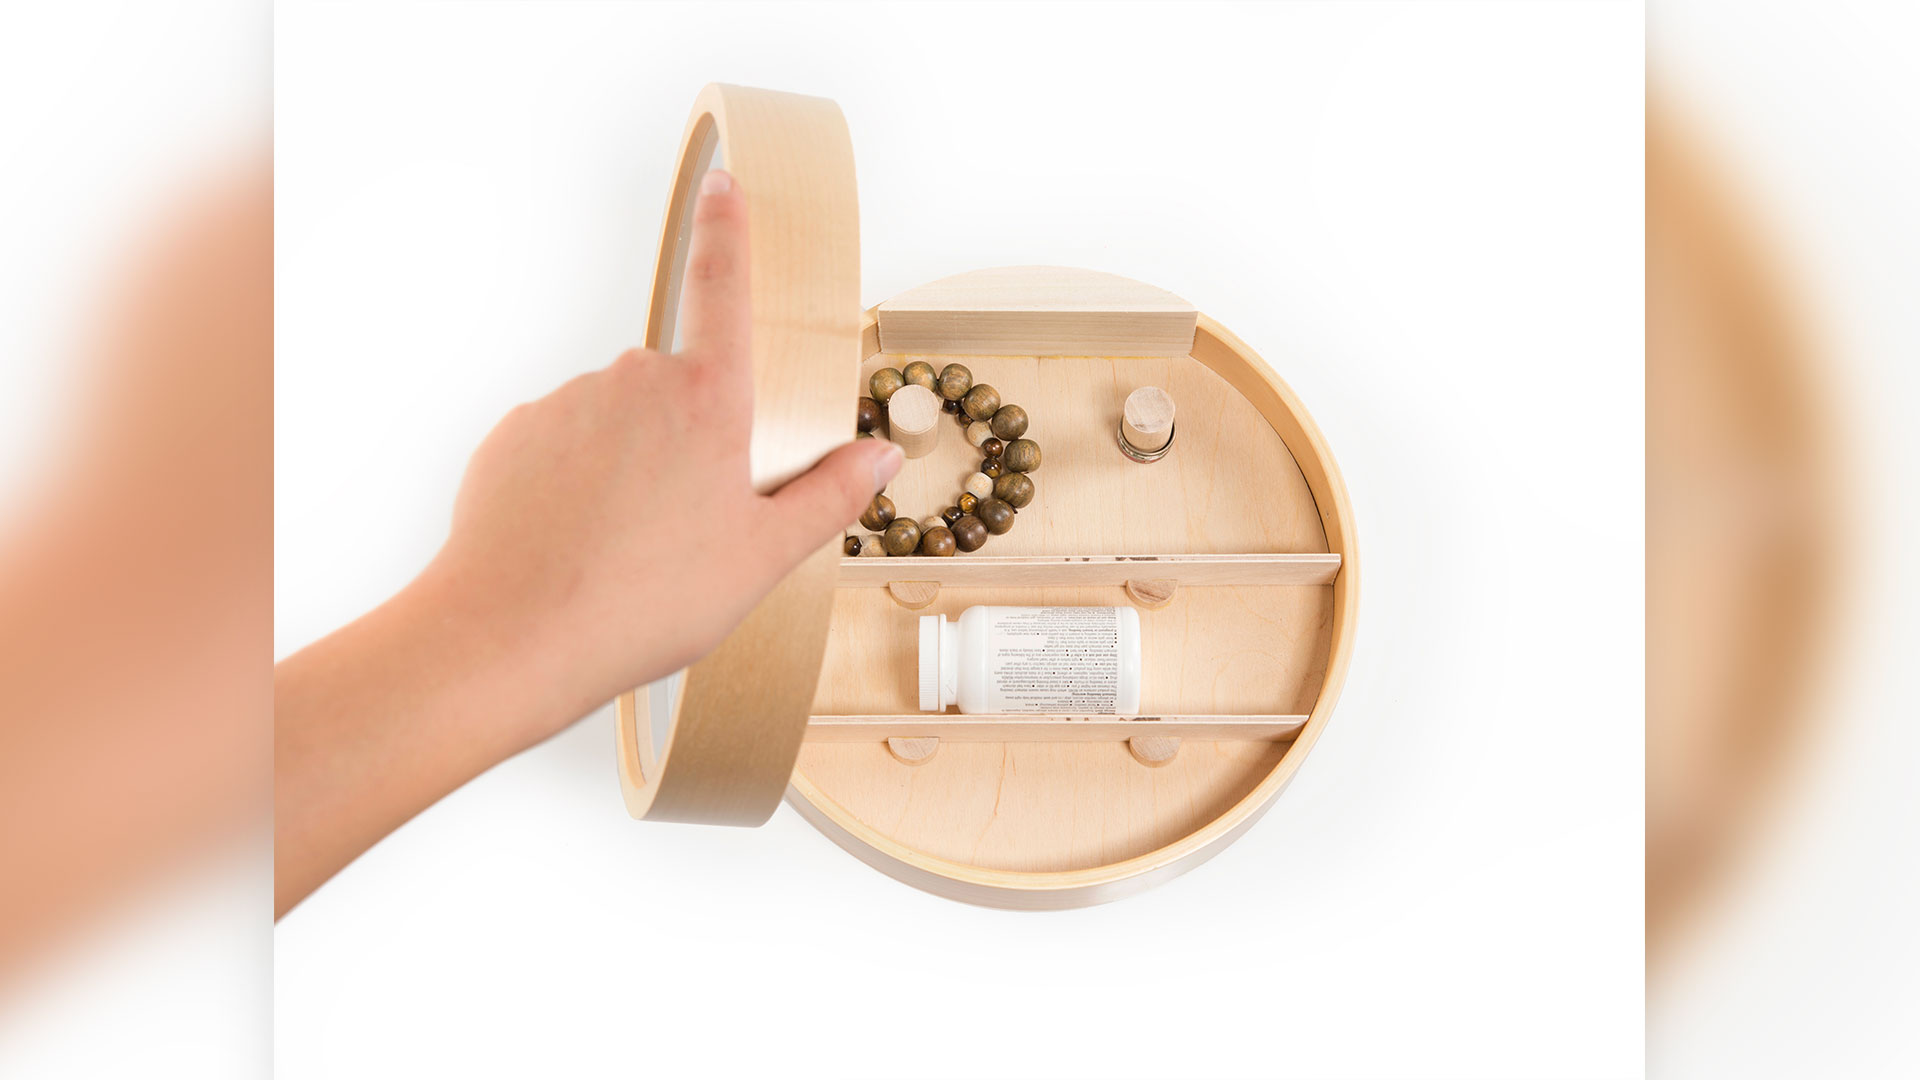 Someone opening up clock face to show 2 interior shelves and two small cylindrical hooks, pill bottle on shelf and small bracelets around cylindrical hooks 